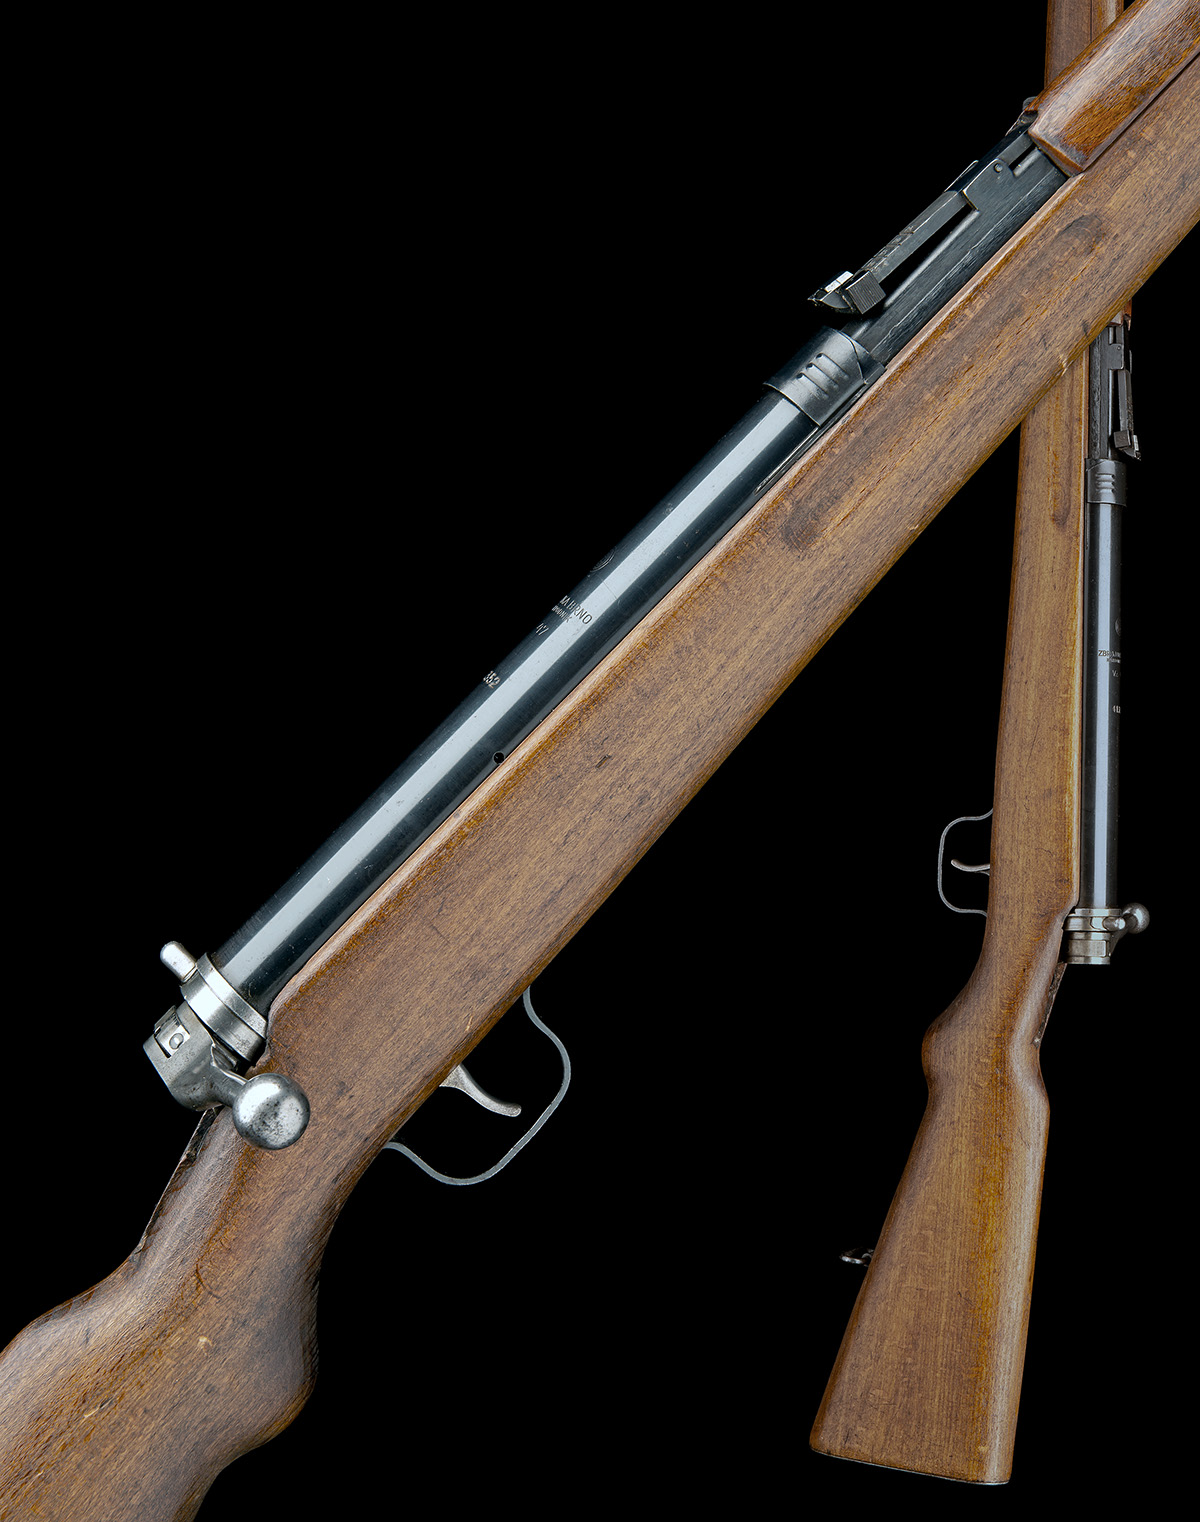 CZ, CZECHOSLOVAKIA A SCARCE .177 (BB) REPEATING BOLT-ACTION MILITARY TRAINING RIFLE, MODEL 'VZ47', - Image 7 of 7